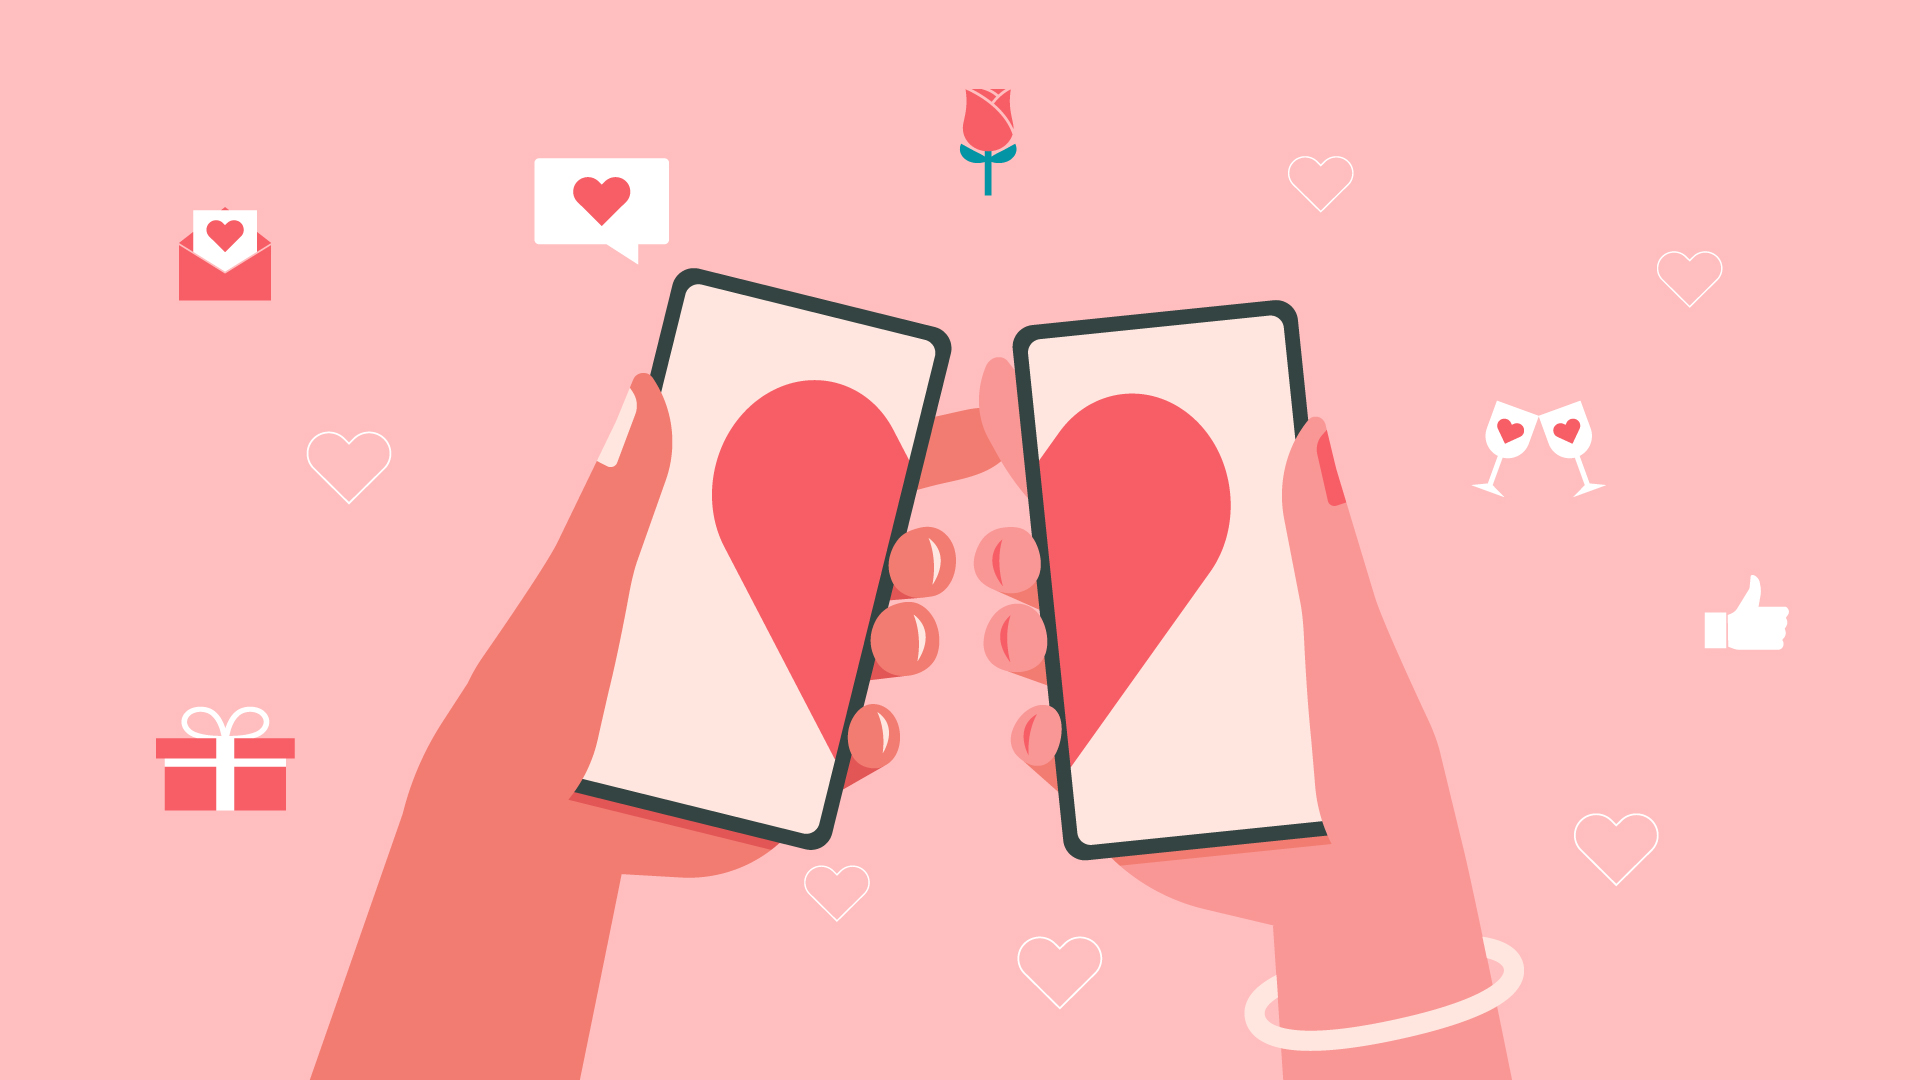 Cartoon hands of a man and a woman both holding their phones close to each other. Their screens have half a love heart each.